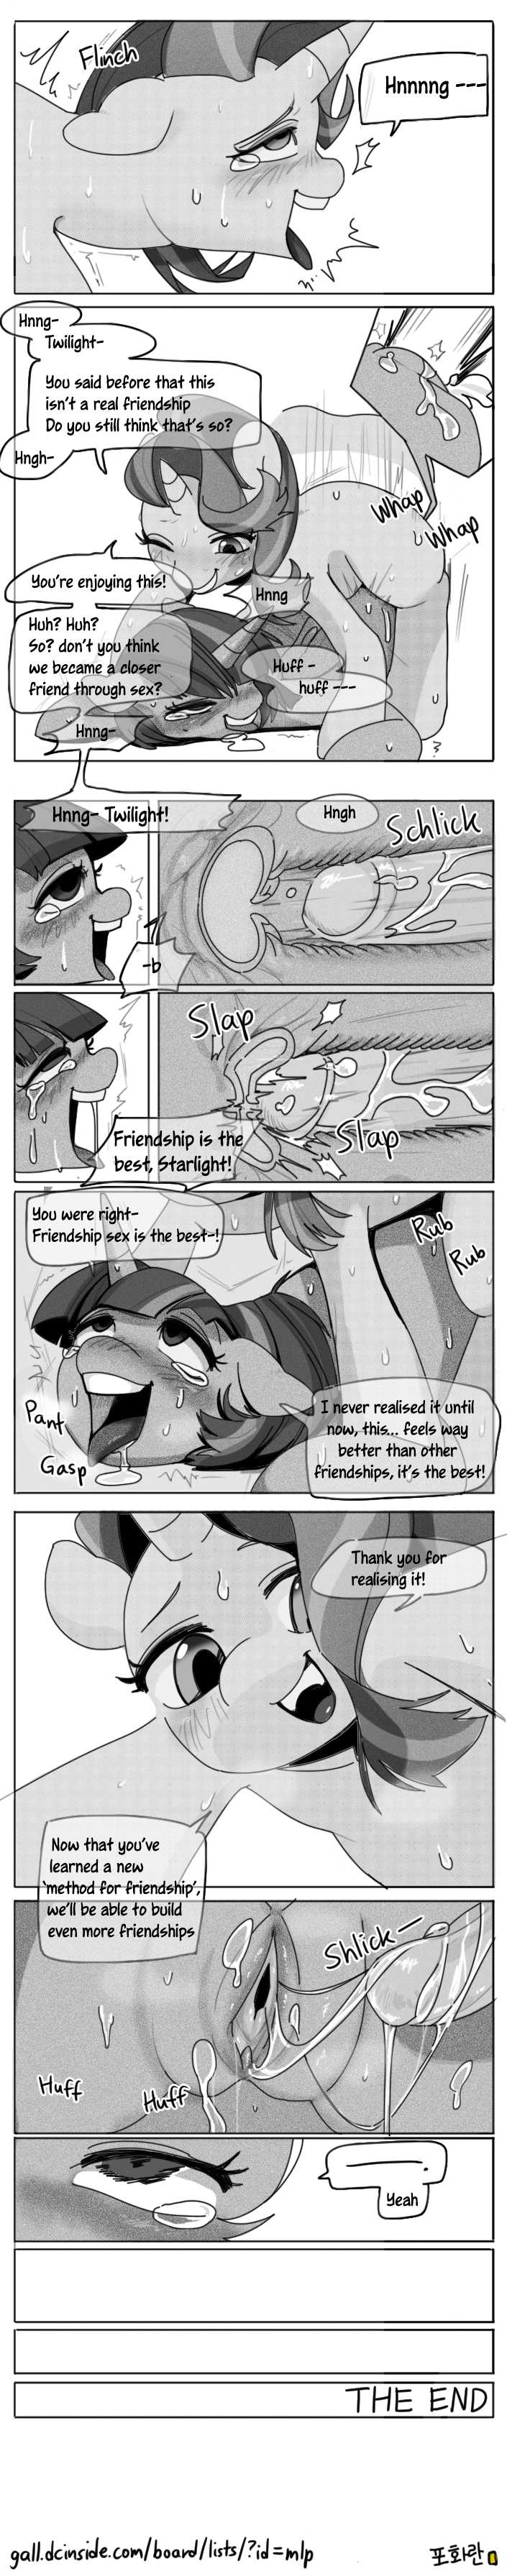 Twilight and Starlight, the Beekeepers - Page 8